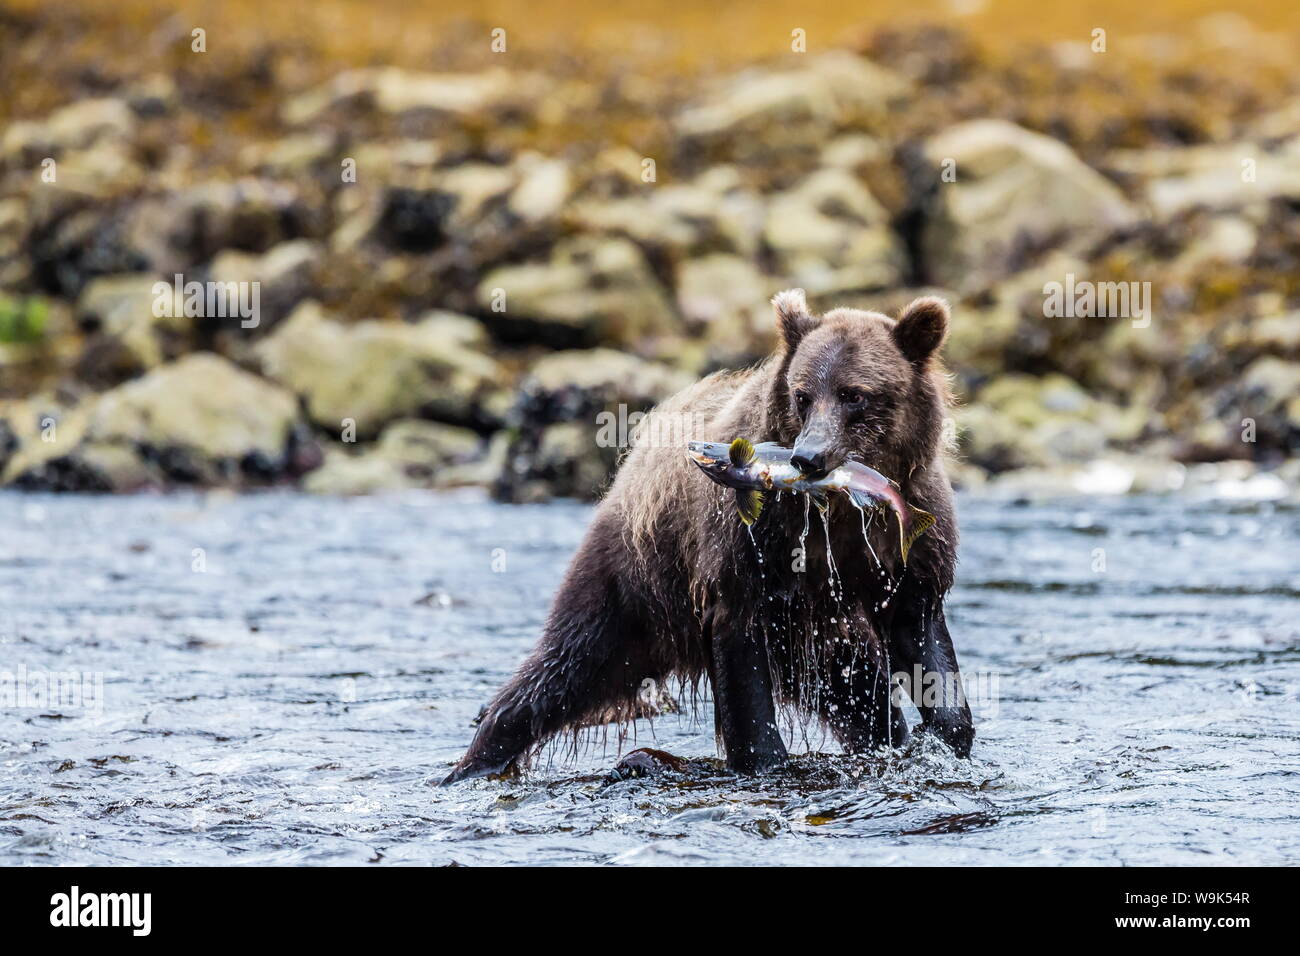 Young brown bear (Ursus arctos) fishing for pink salmon at low tide in Pavlof Harbour, Chichagof Island, Southeast Alaska, United States of America Stock Photo